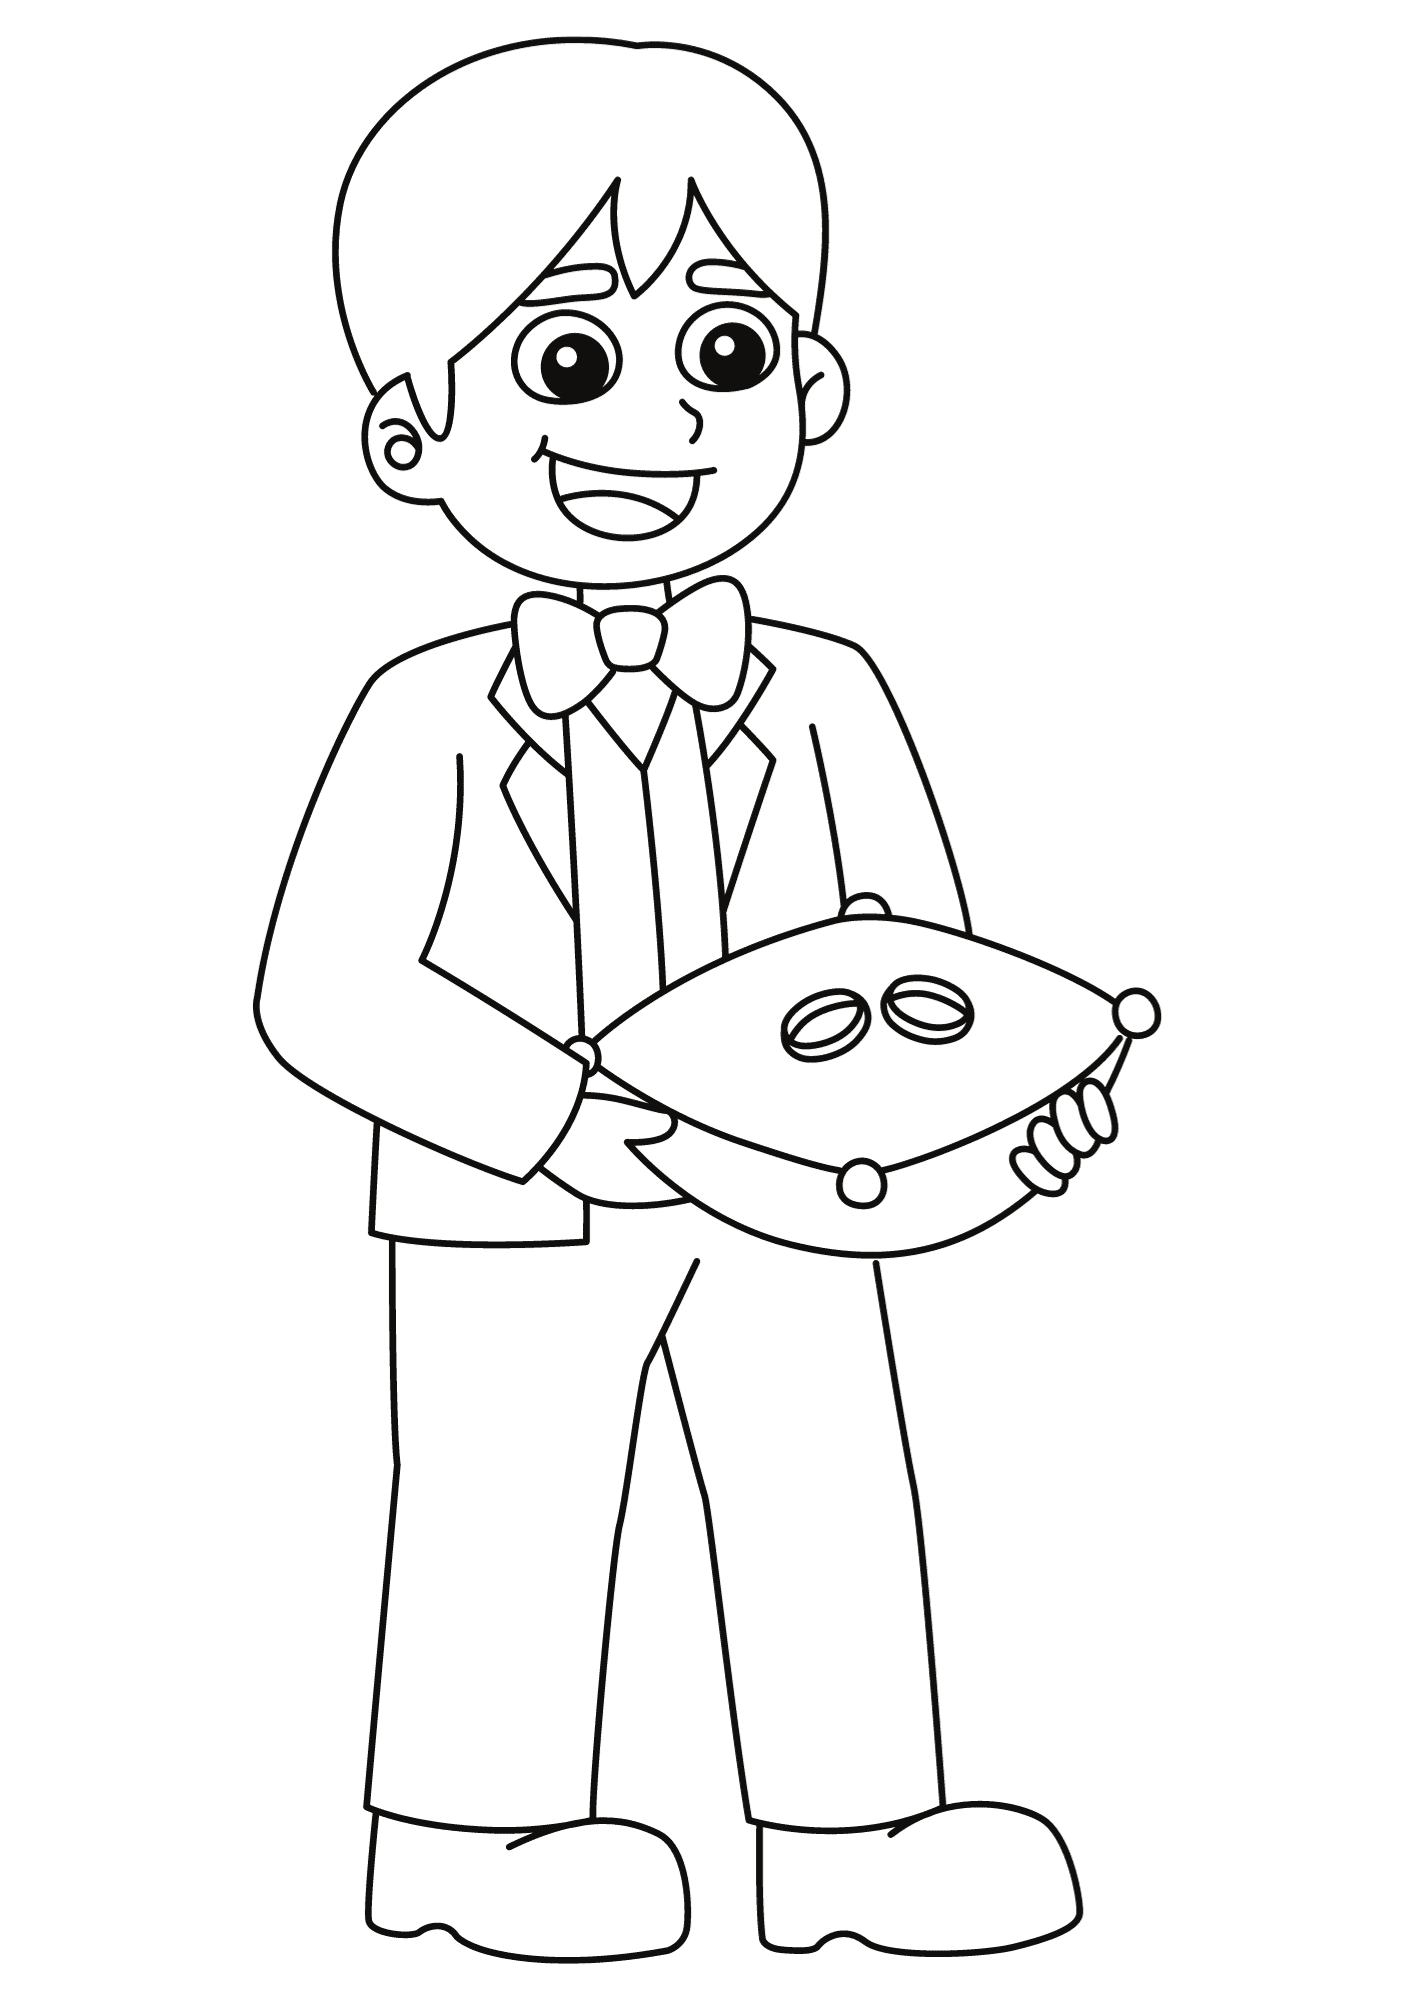 Wedding Ring Of Boy Coloring Page